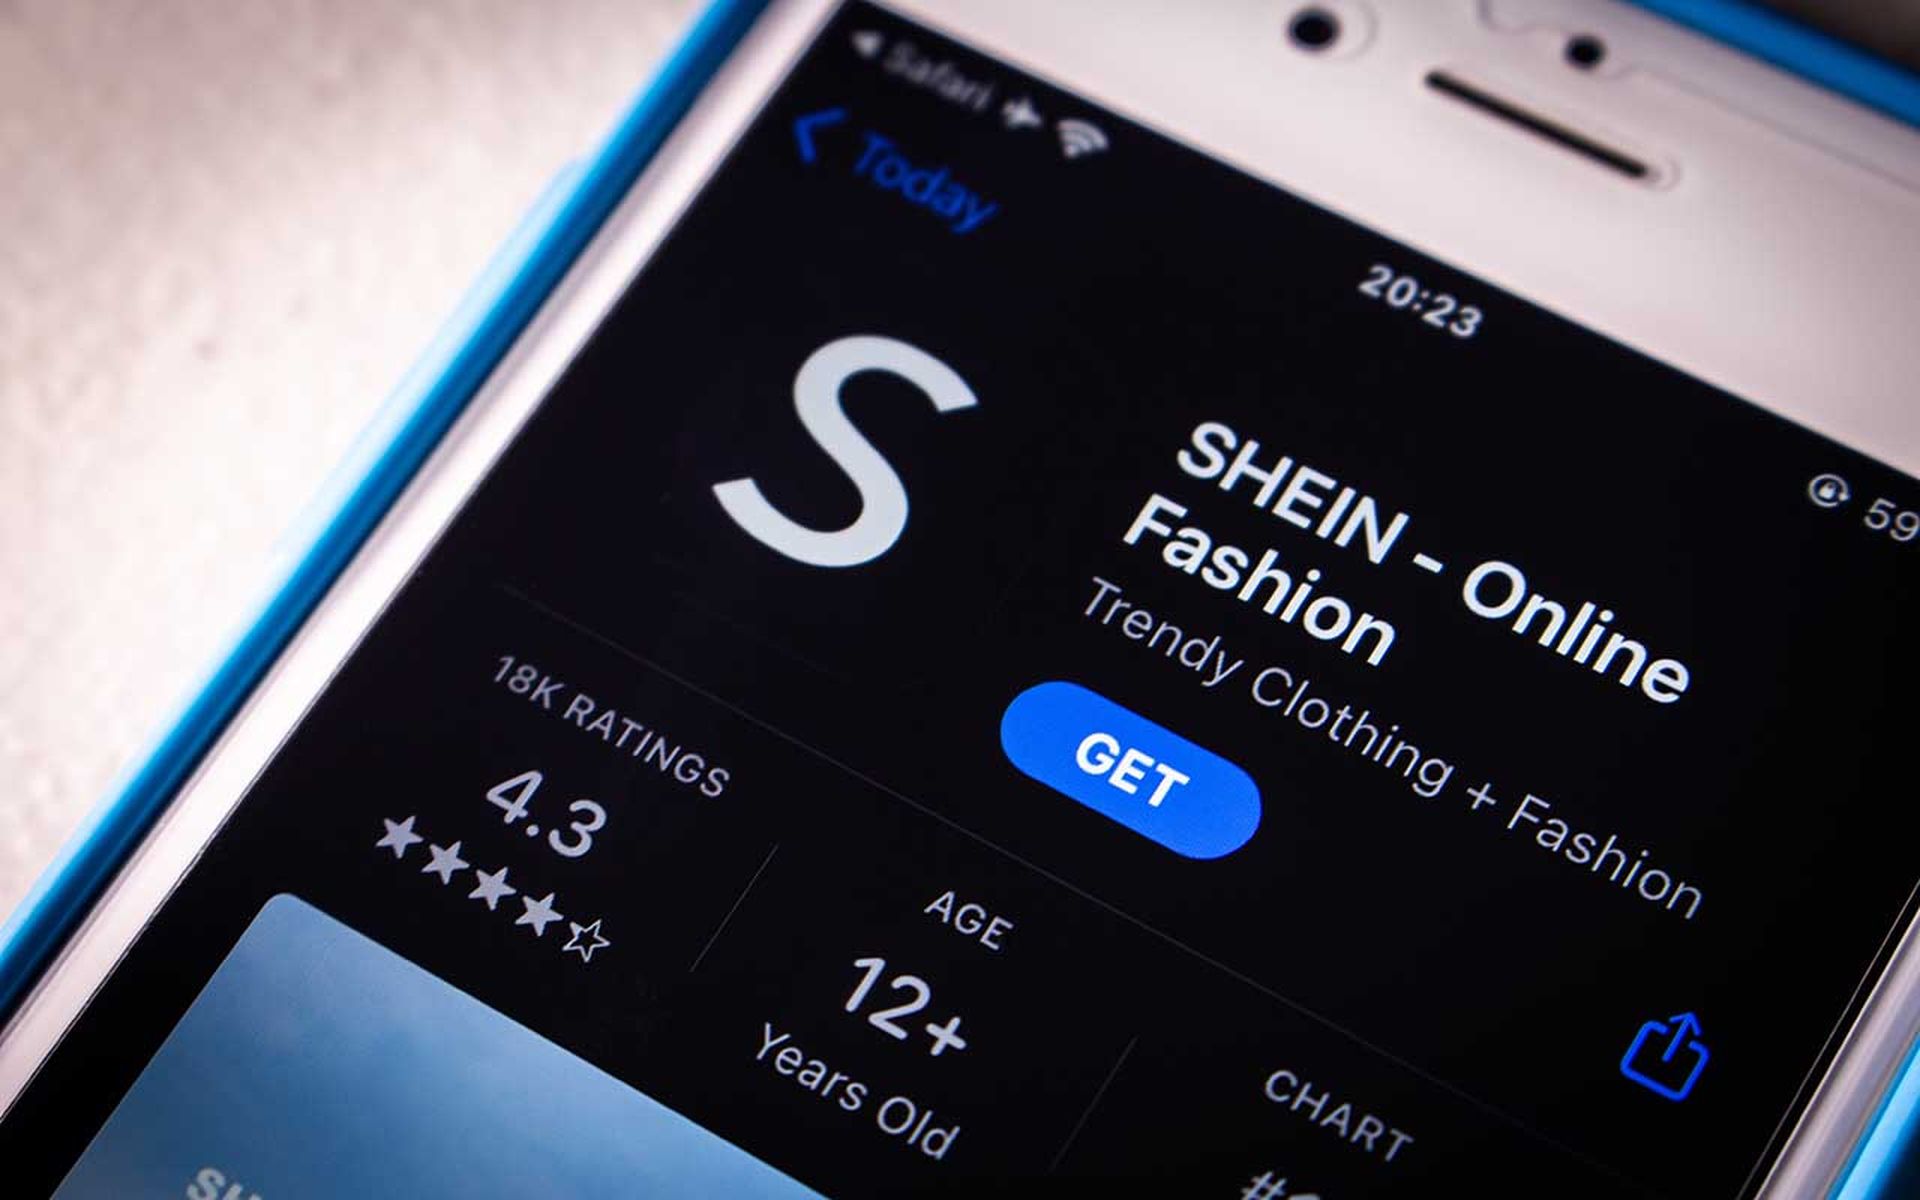 Microsoft discovers Shein app accessing clipboard on Android devices